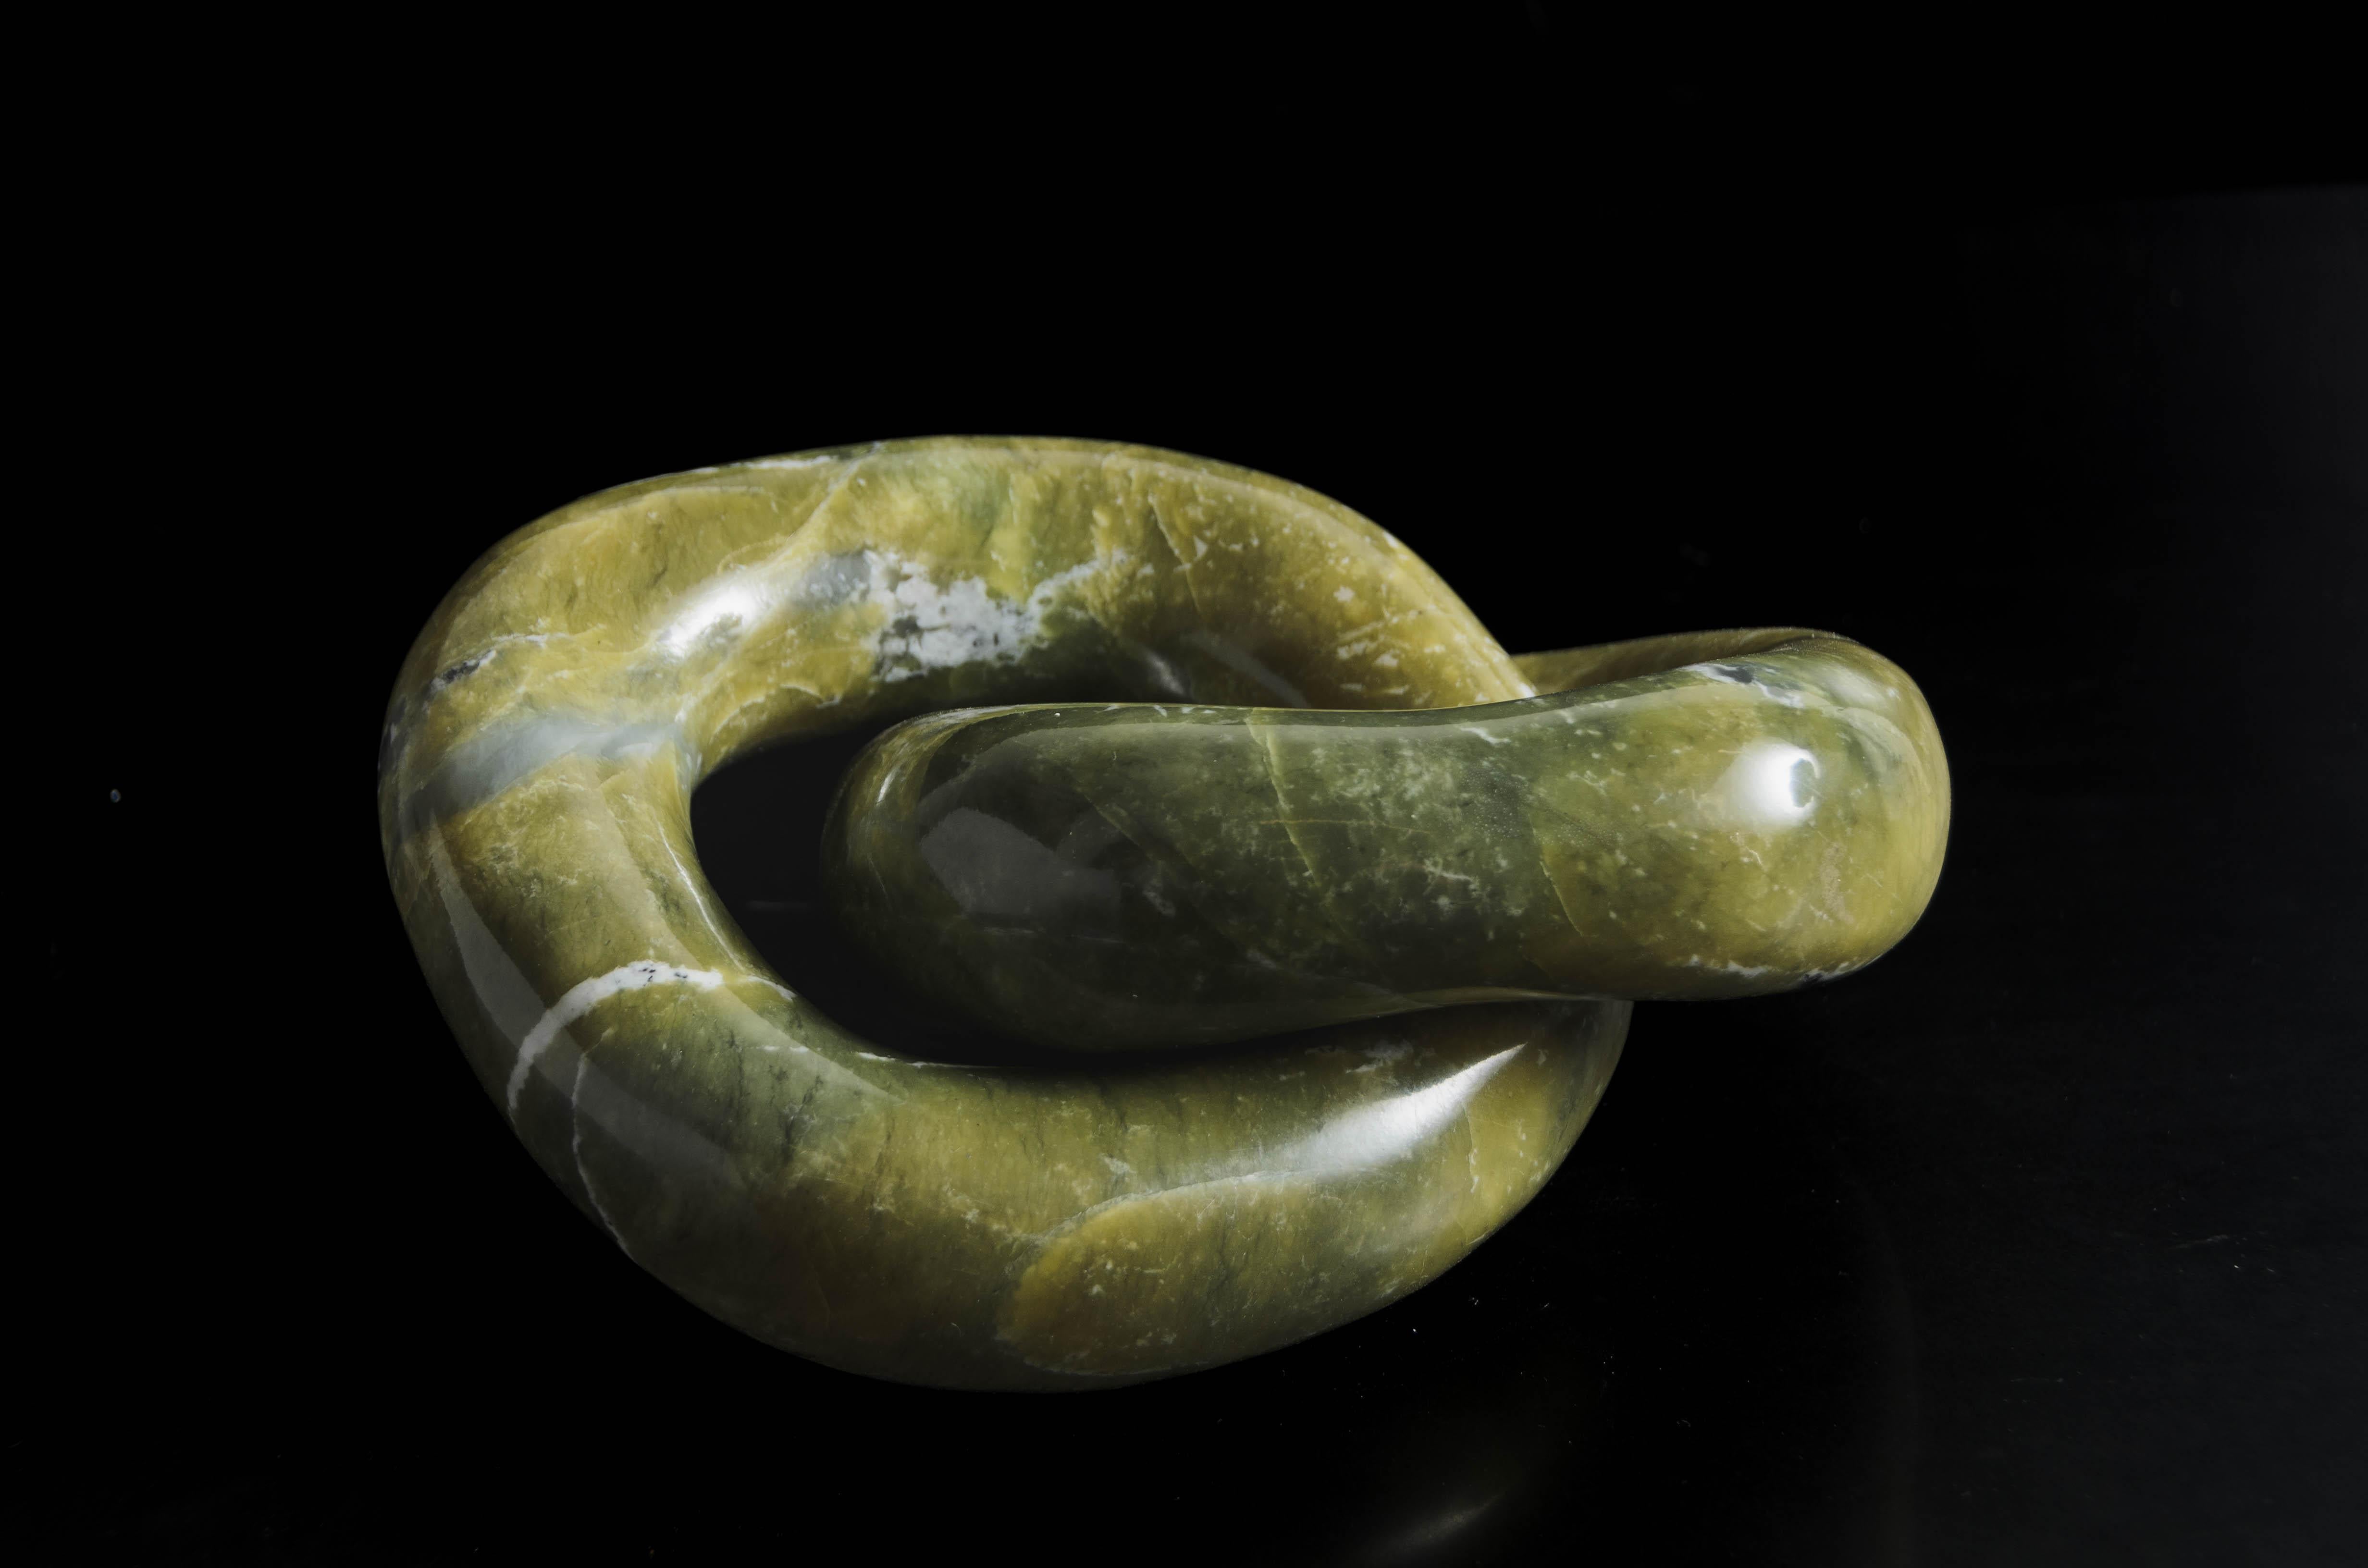 Minimalist Contemporary Nephrite Jade Double Ring Link Sculpture II by Robert Kuo For Sale